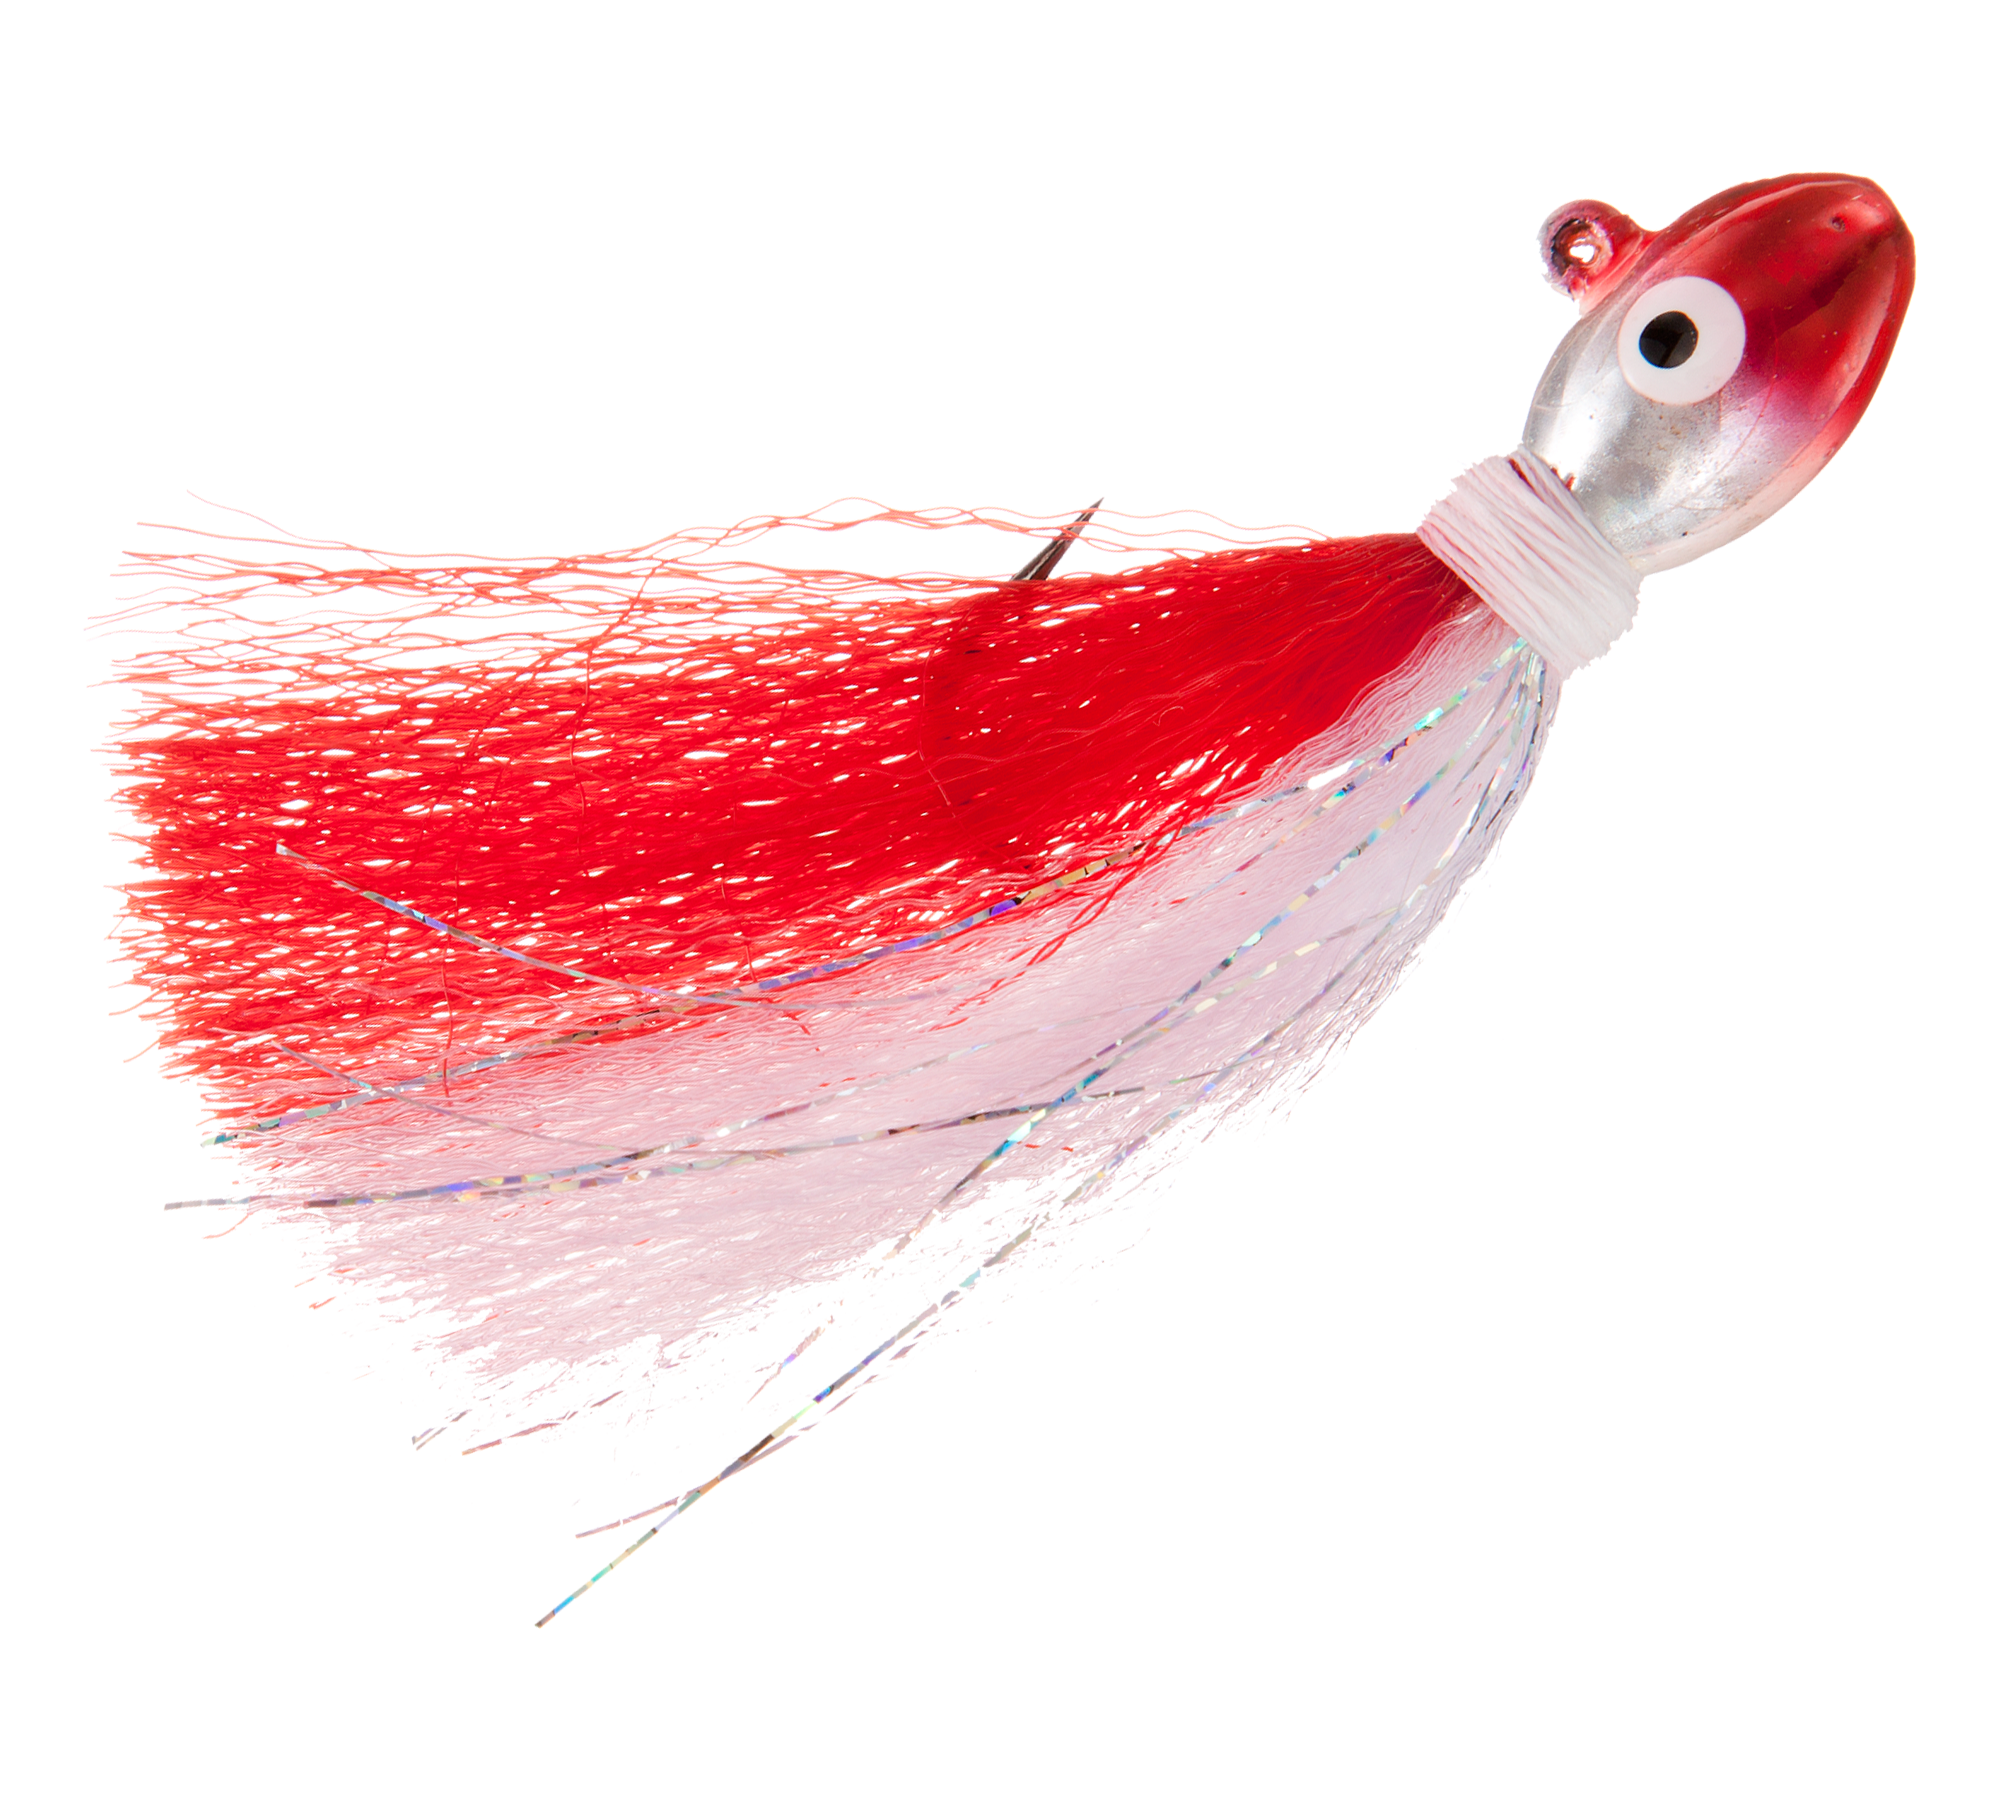 Offshore Angler Deluxe Pompano Jigs - 1/2 oz. - Red Shad